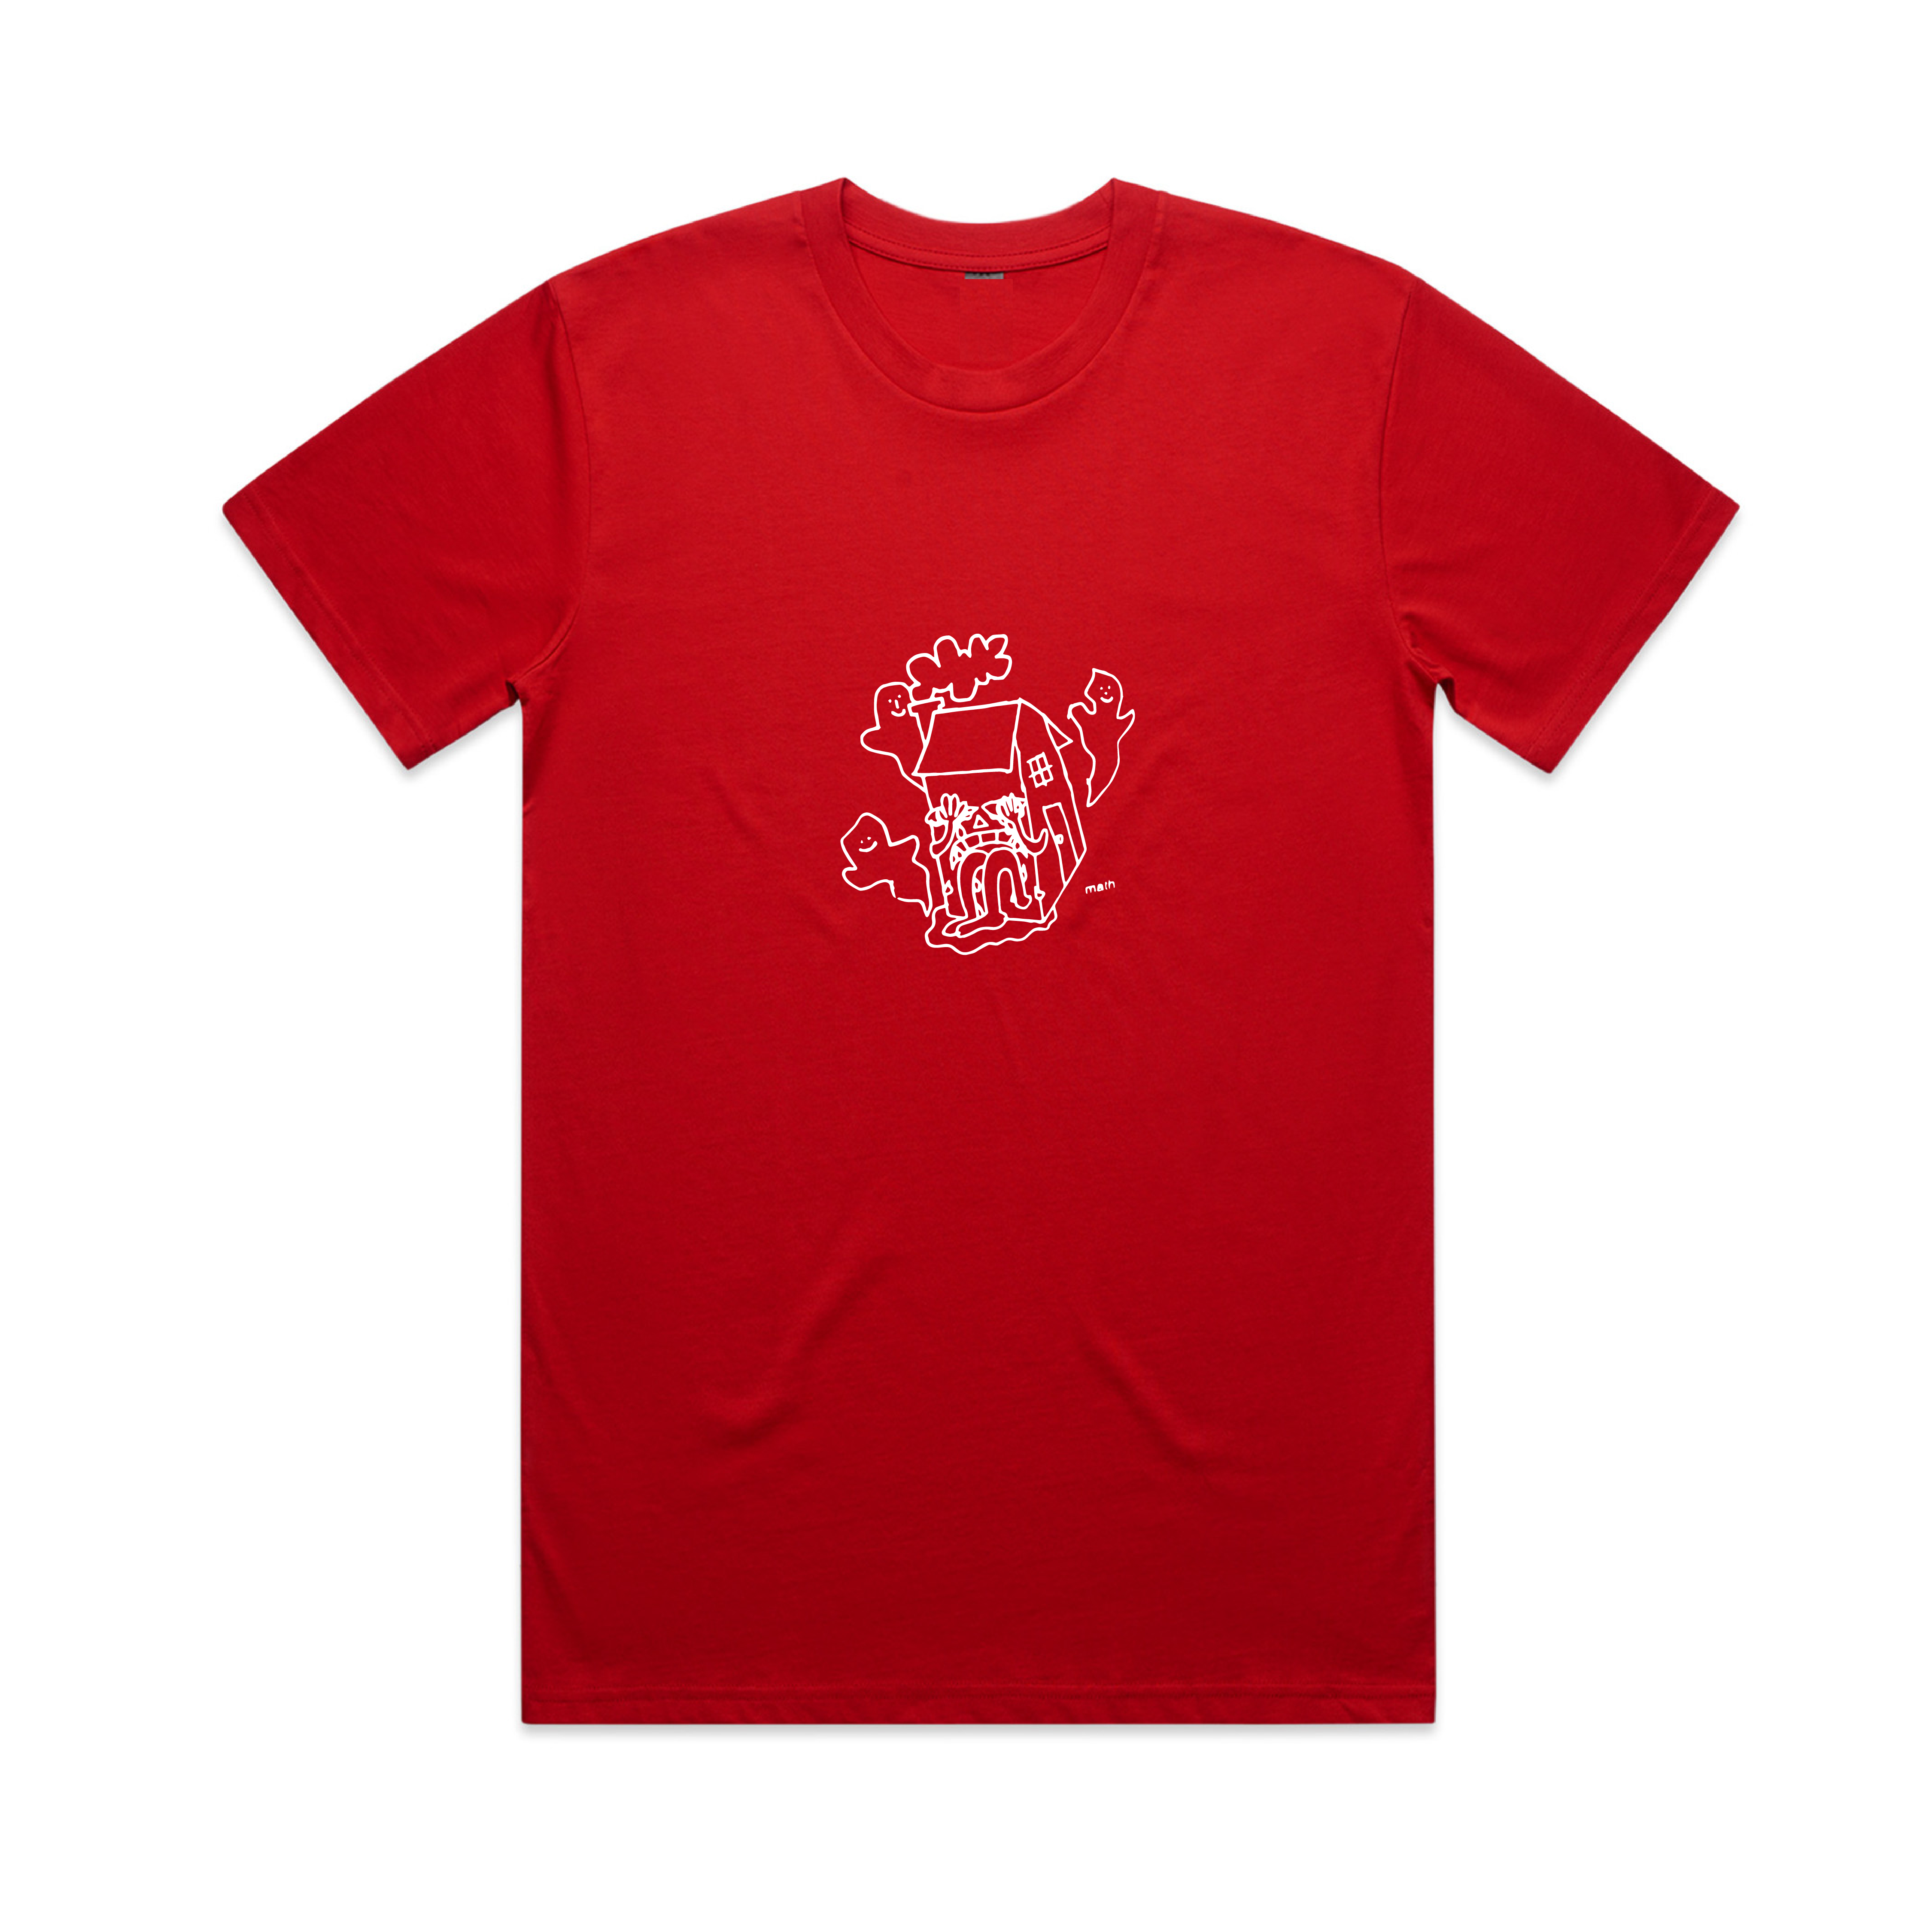 Math Graphic tee - Red